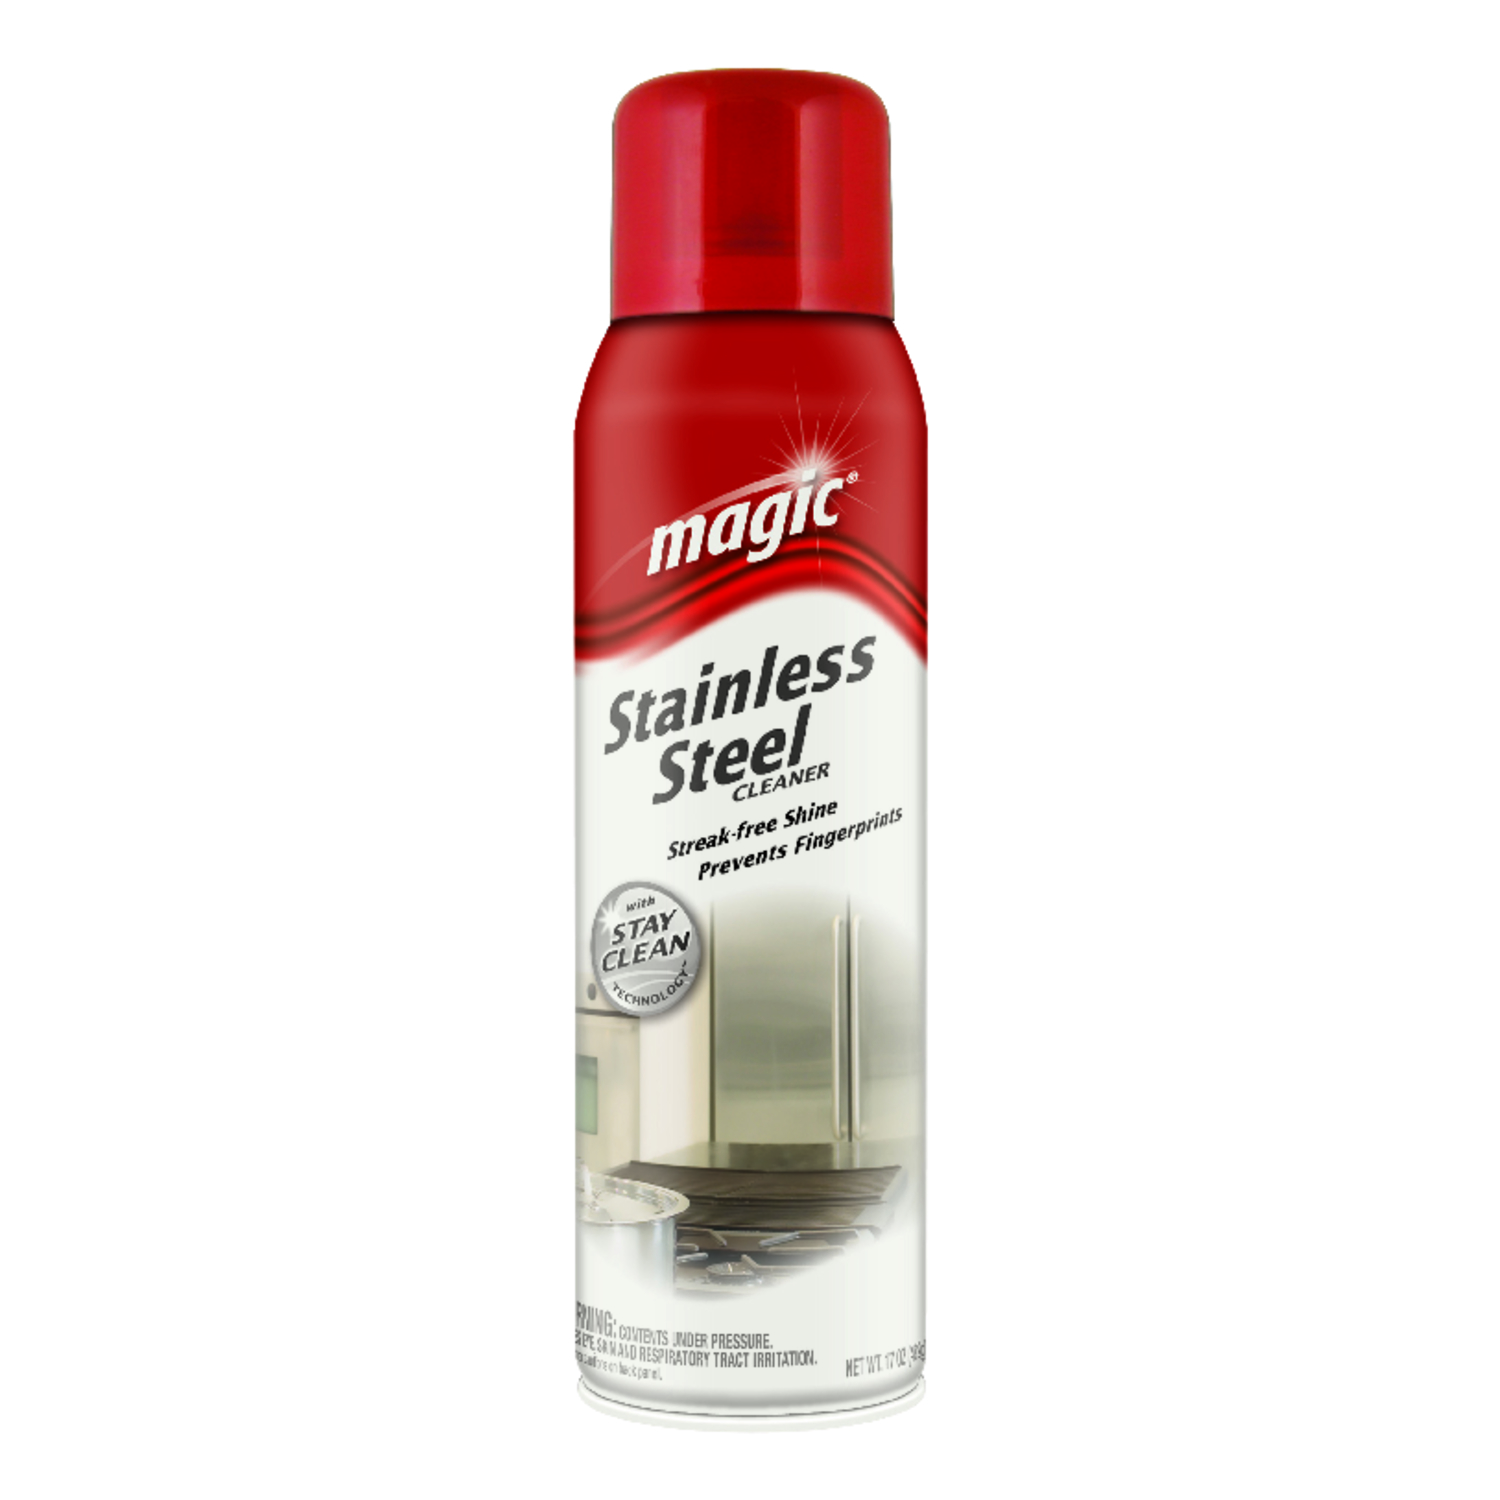 Magic Citrus Scent Stainless Steel Cleaner & Polish 17 oz Spray